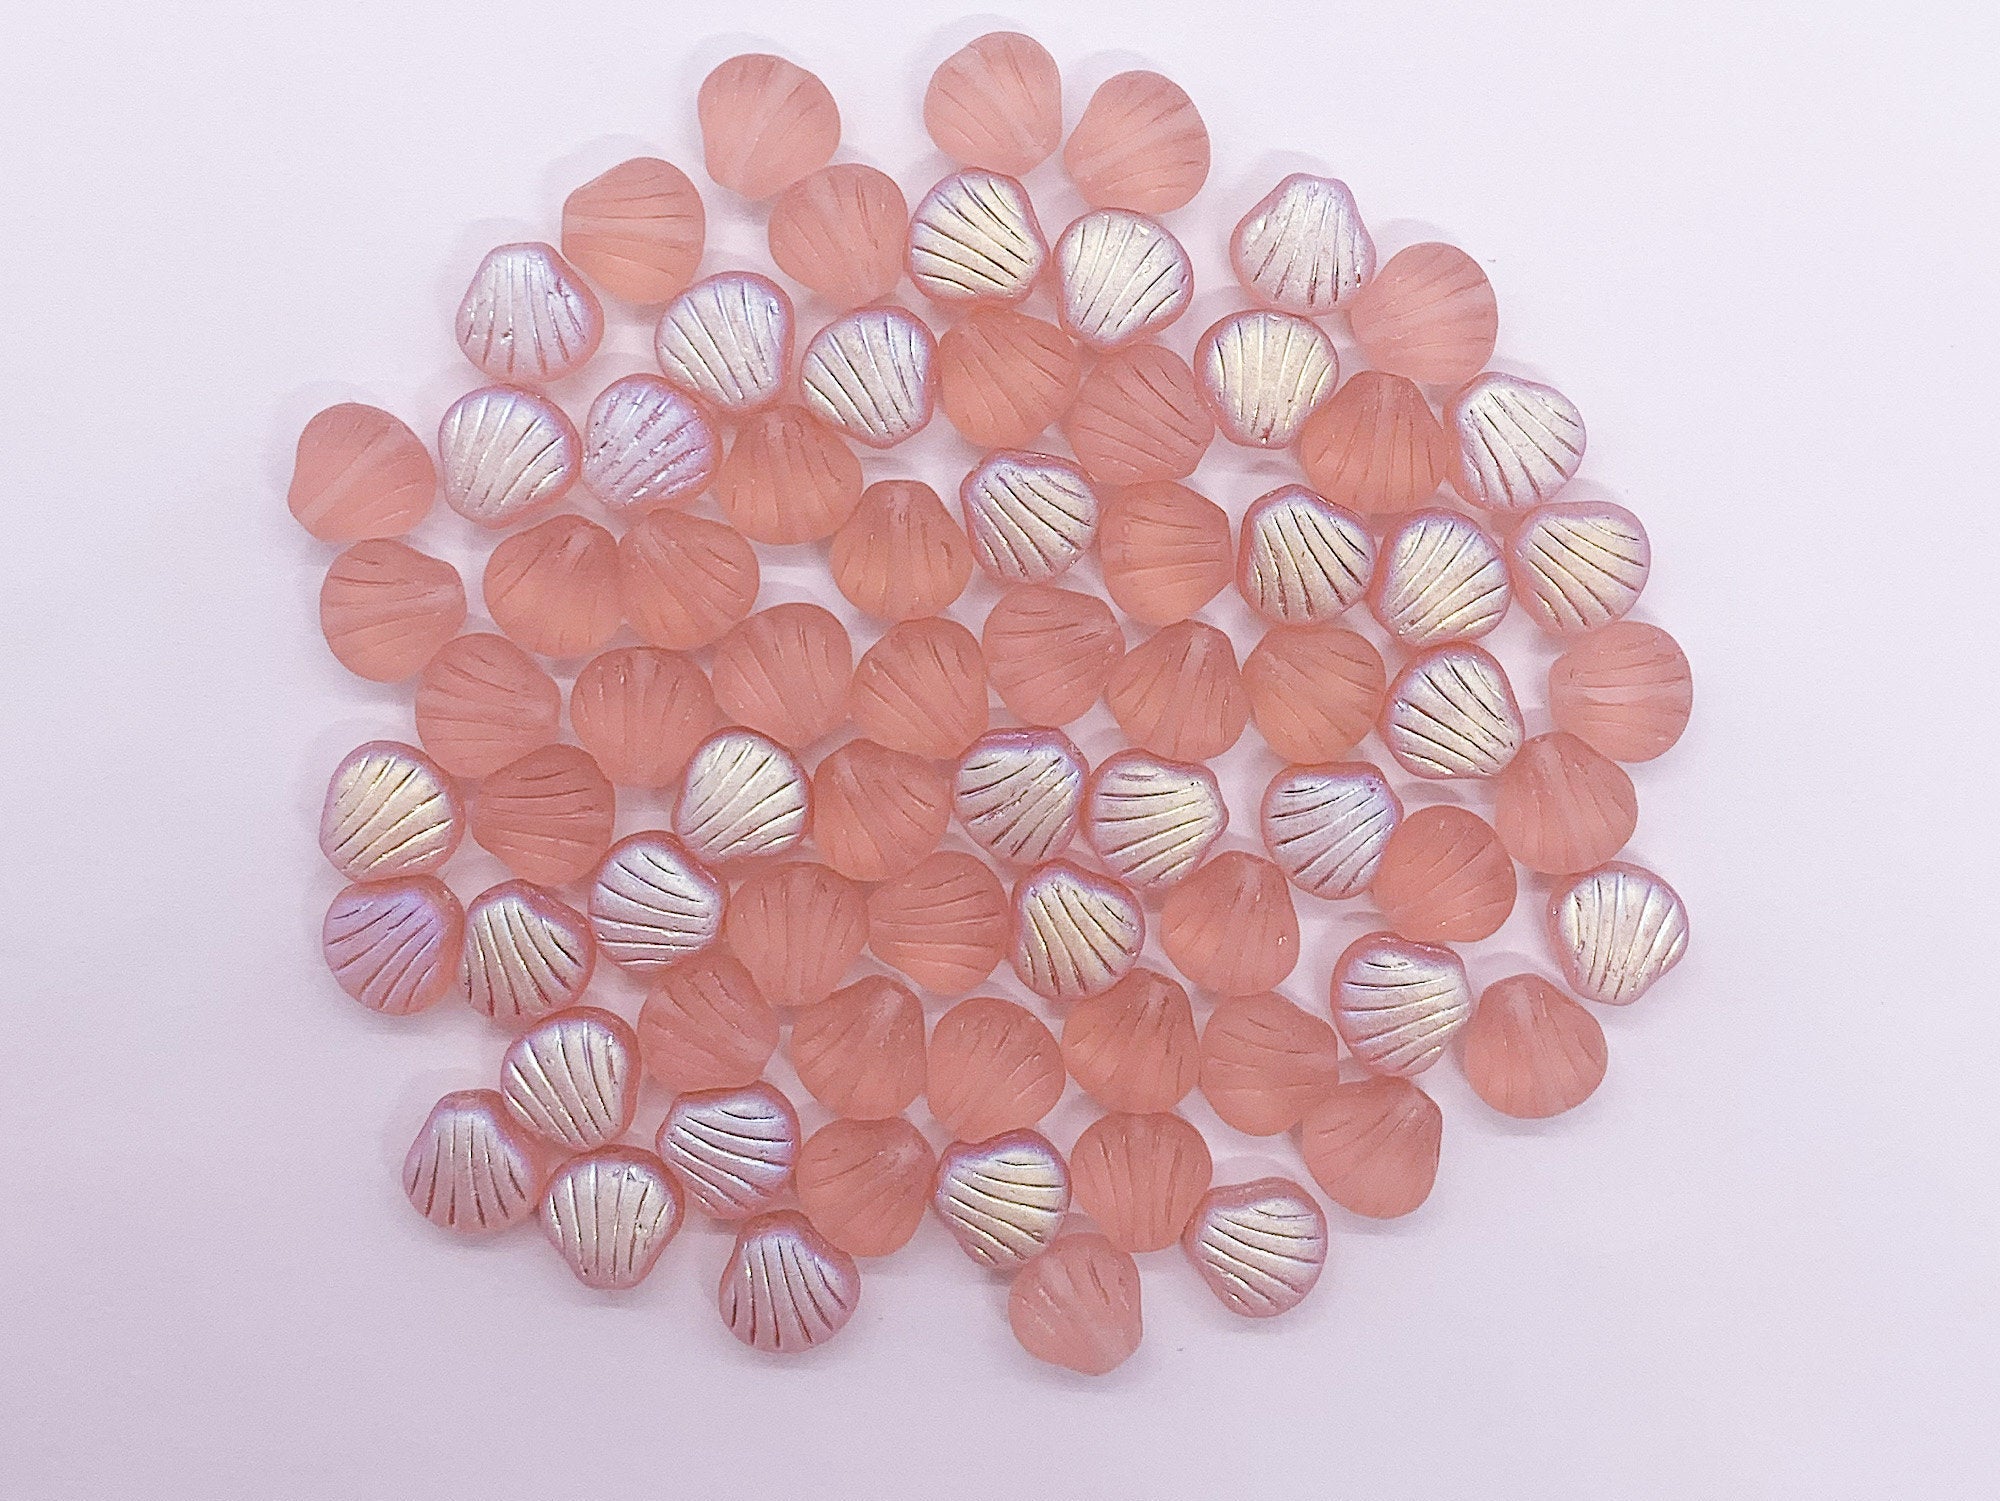 60pcs 20mm Silver Brass Wine Glass Charm Rings with 19pcs Seashell Sea  Creatures Charms Pendants, 20pcs Transparent Glass Beads and 20pcs Brass  Spacer Beads for Party Favor 